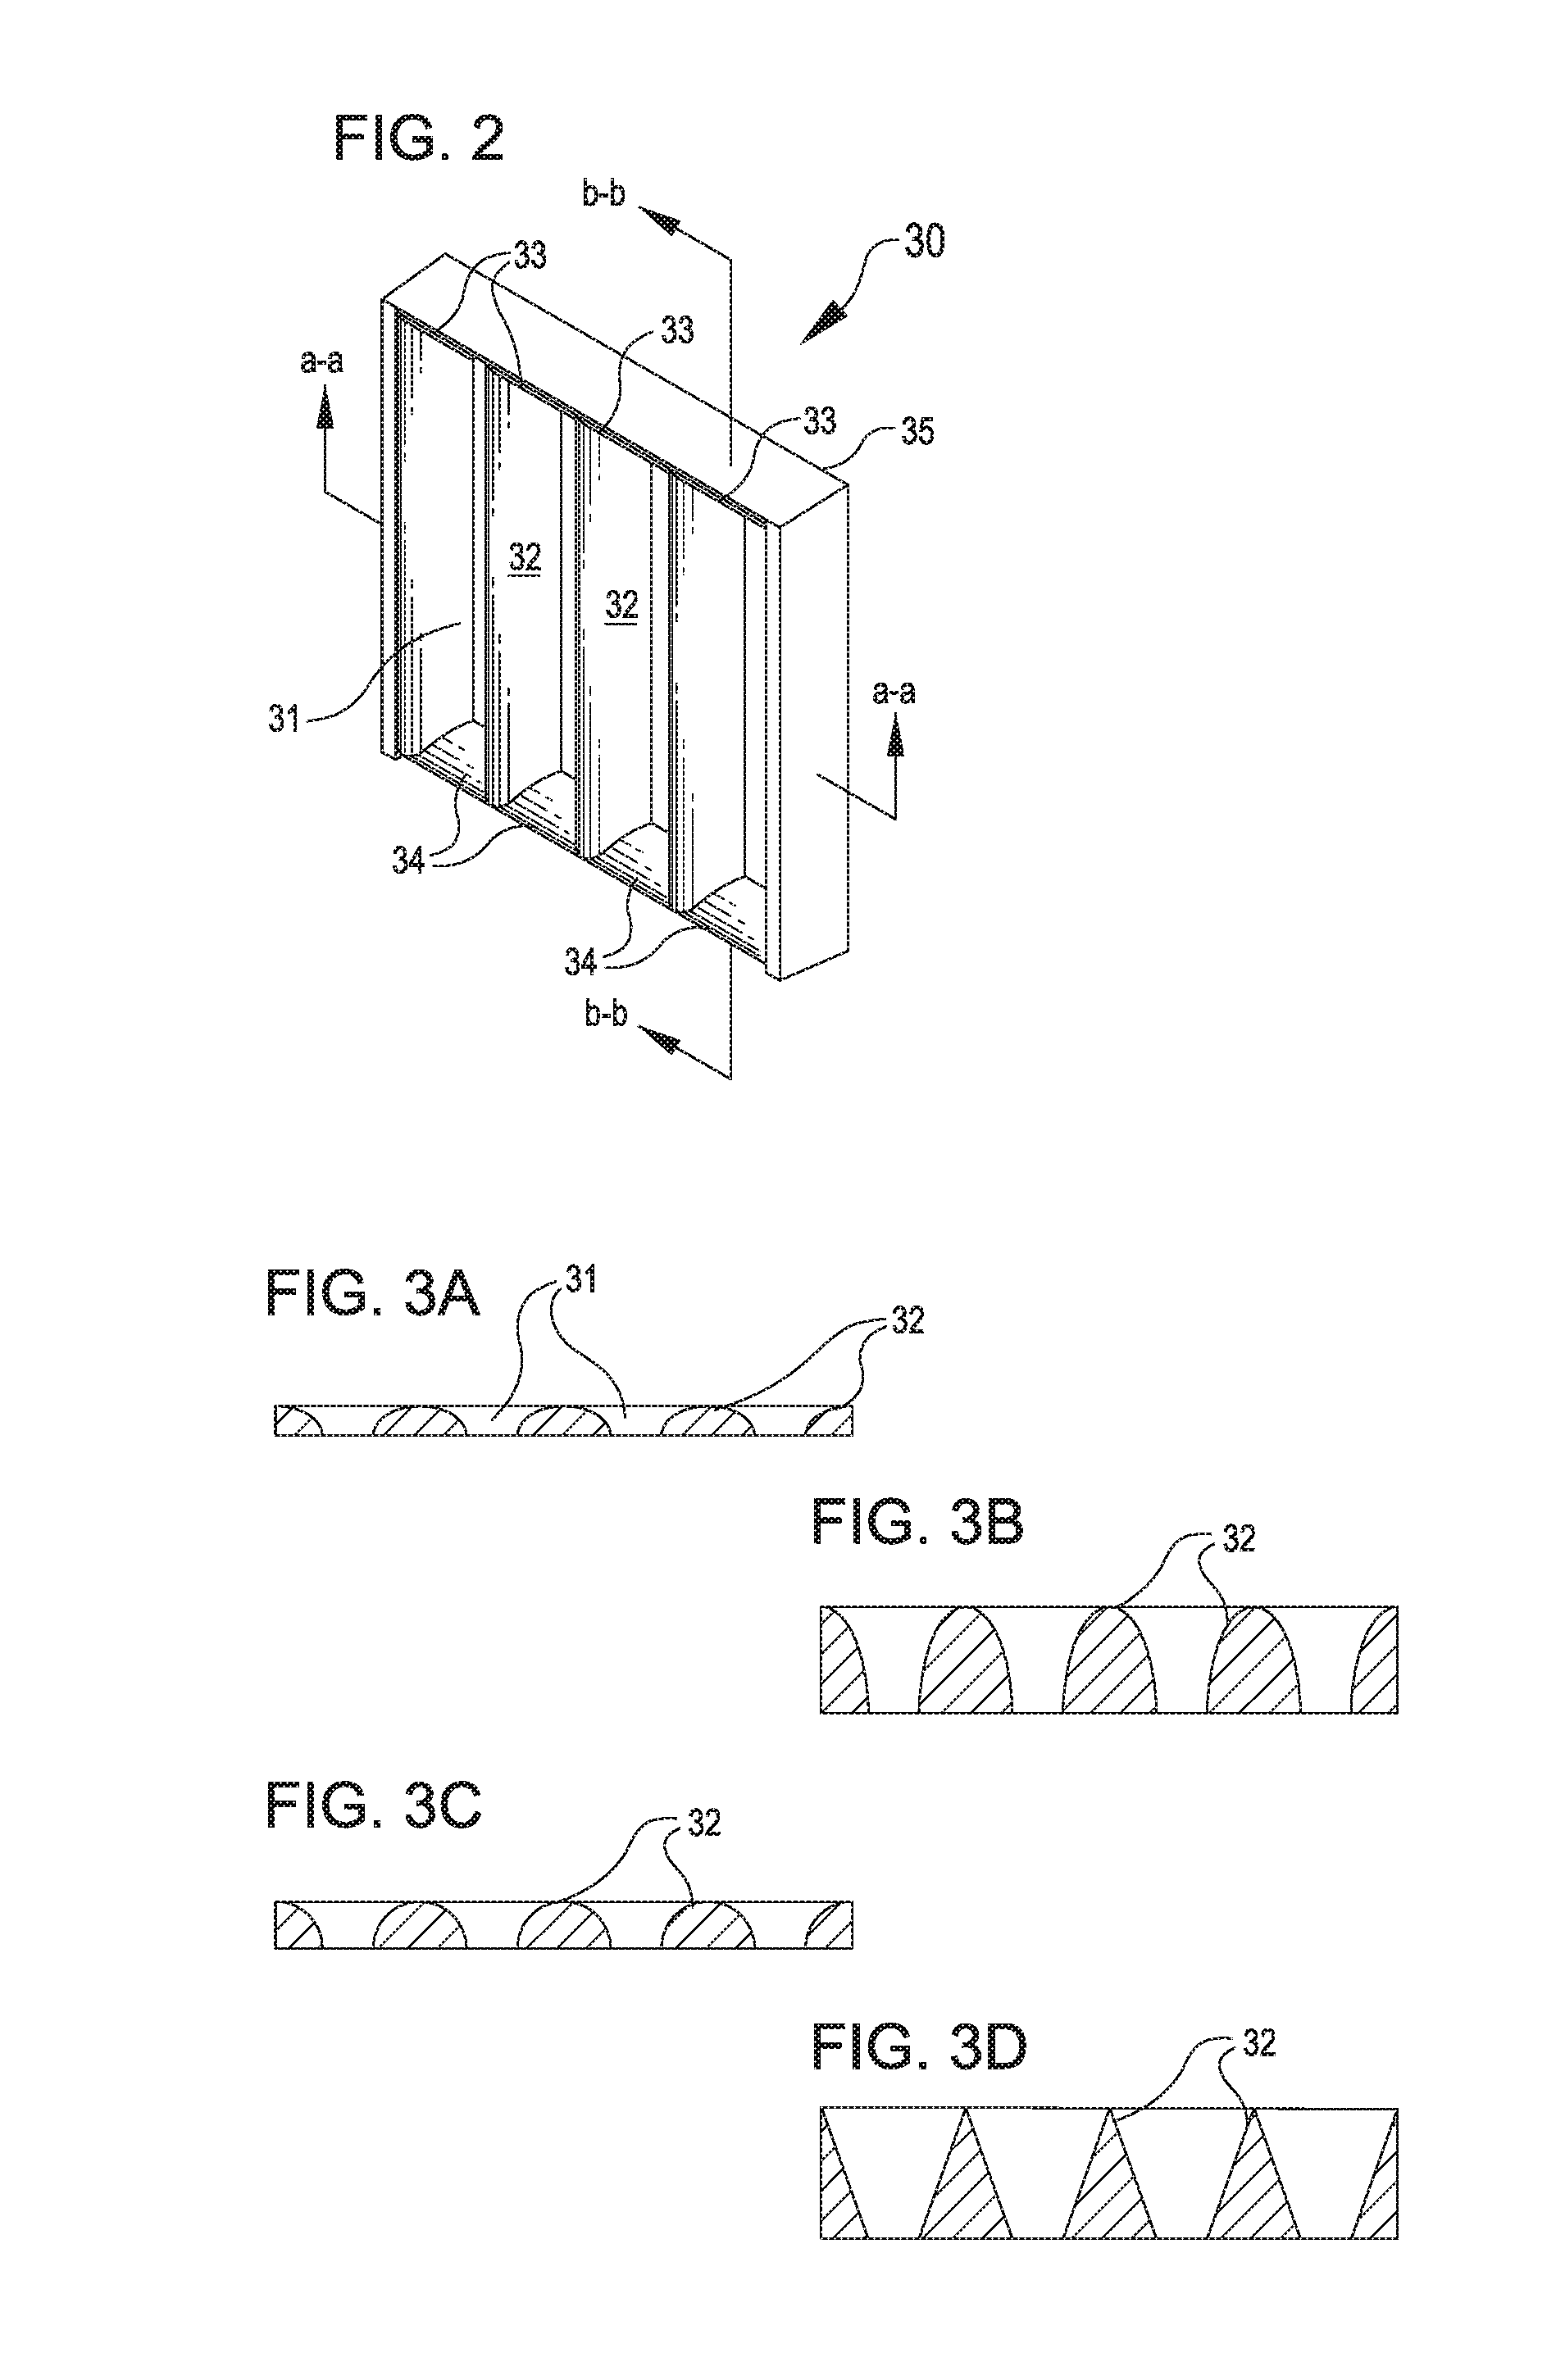 Filter assembly with curved inlet guide